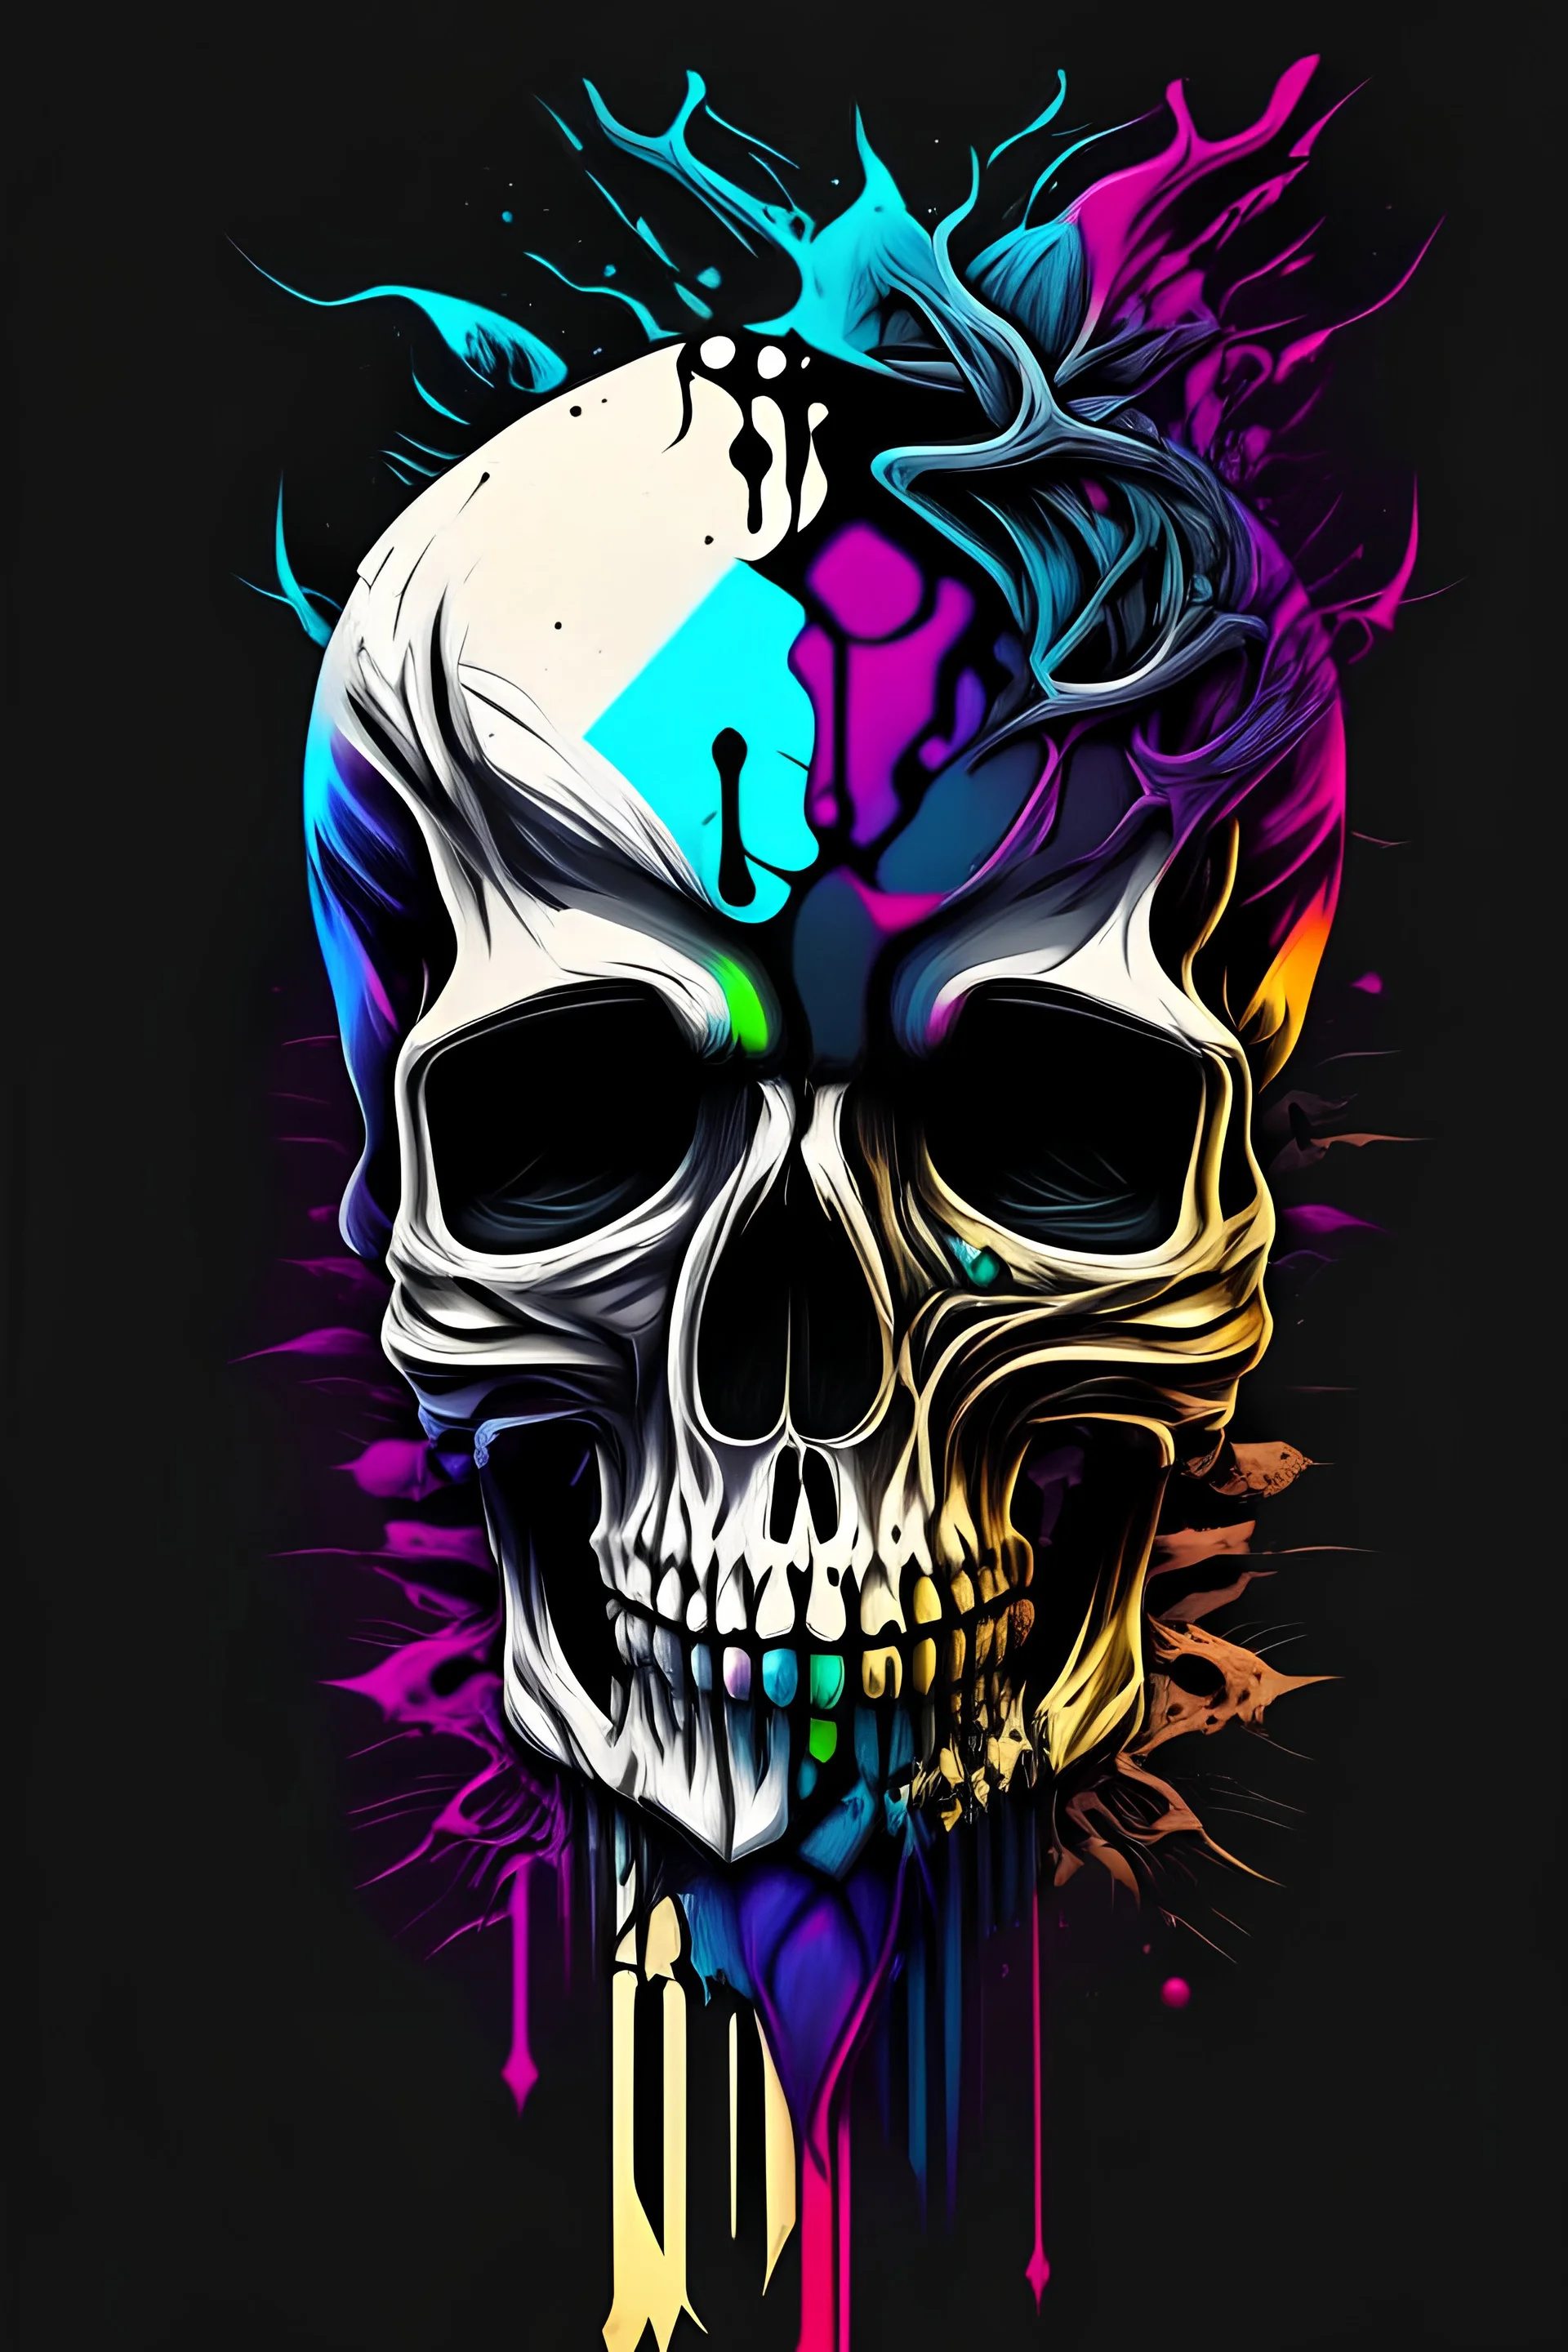 create a logo for a rap group i want the image to be a black and white psychedelic skull